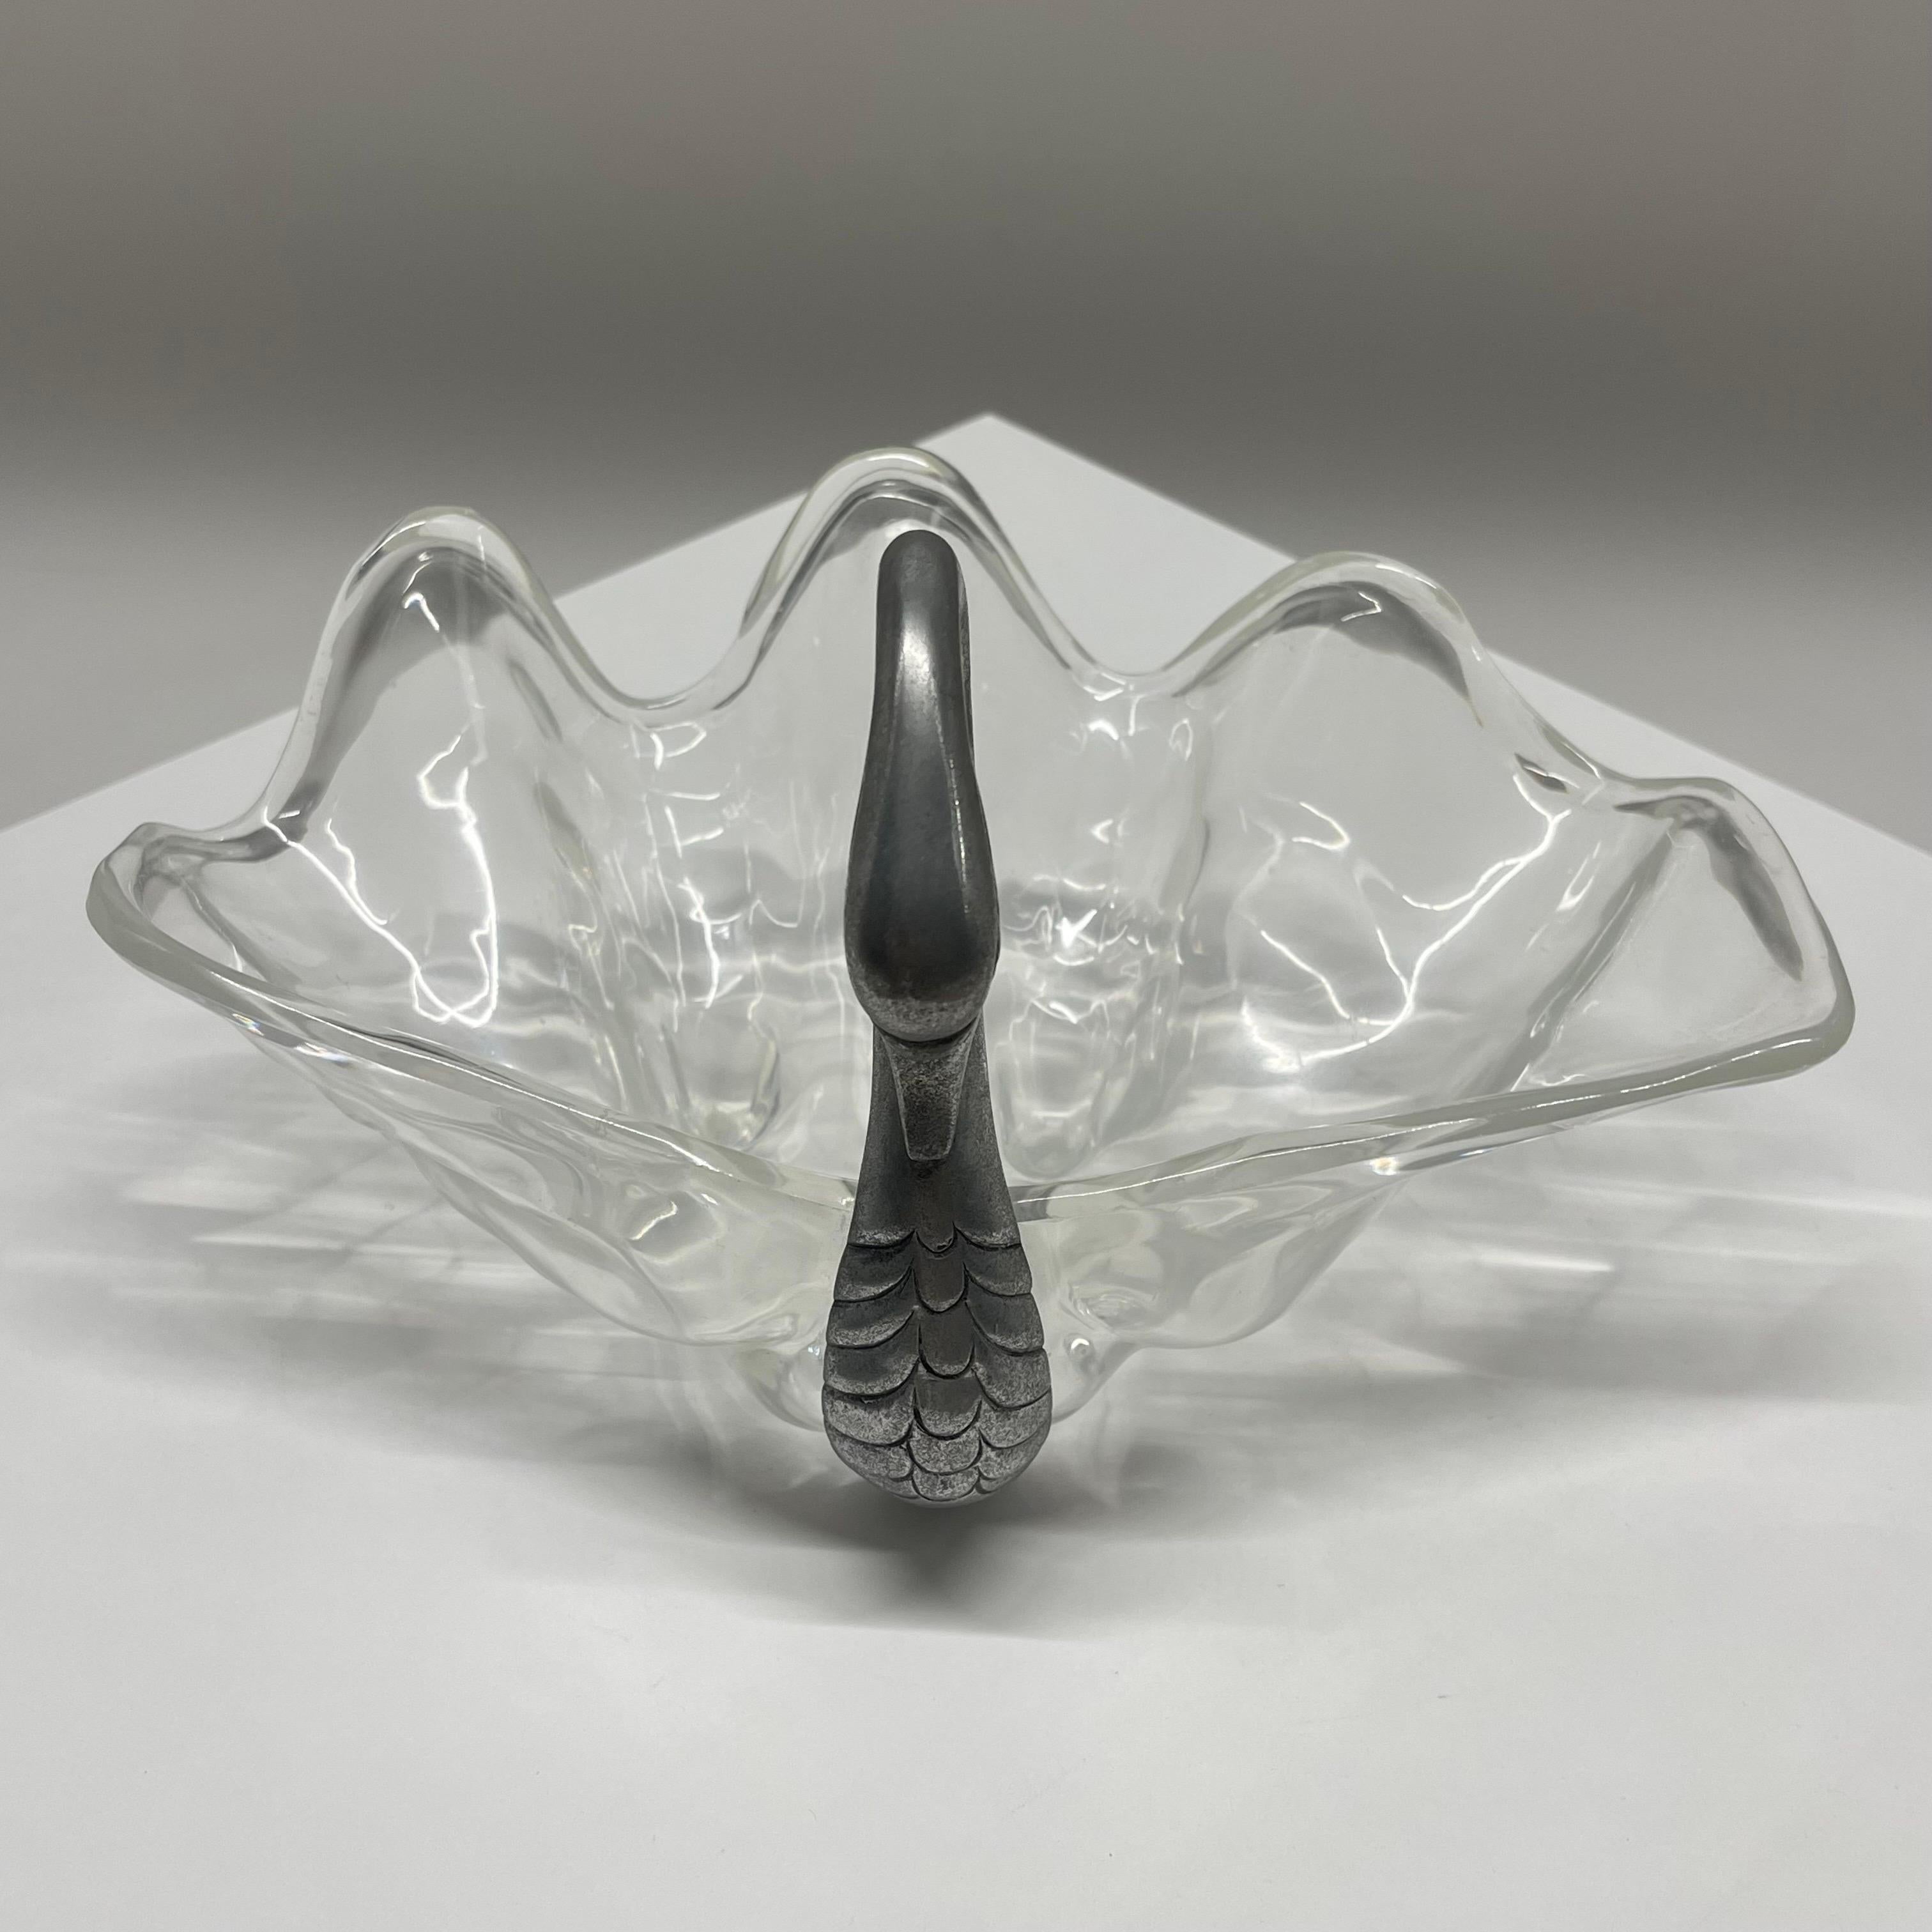 Whimsical serving piece in the shape of a swan with a shell bowl body. Rendered in aluminum for the swan and acrylic lucite for the shell body. By Arthur Court, USA, circa 1970s.